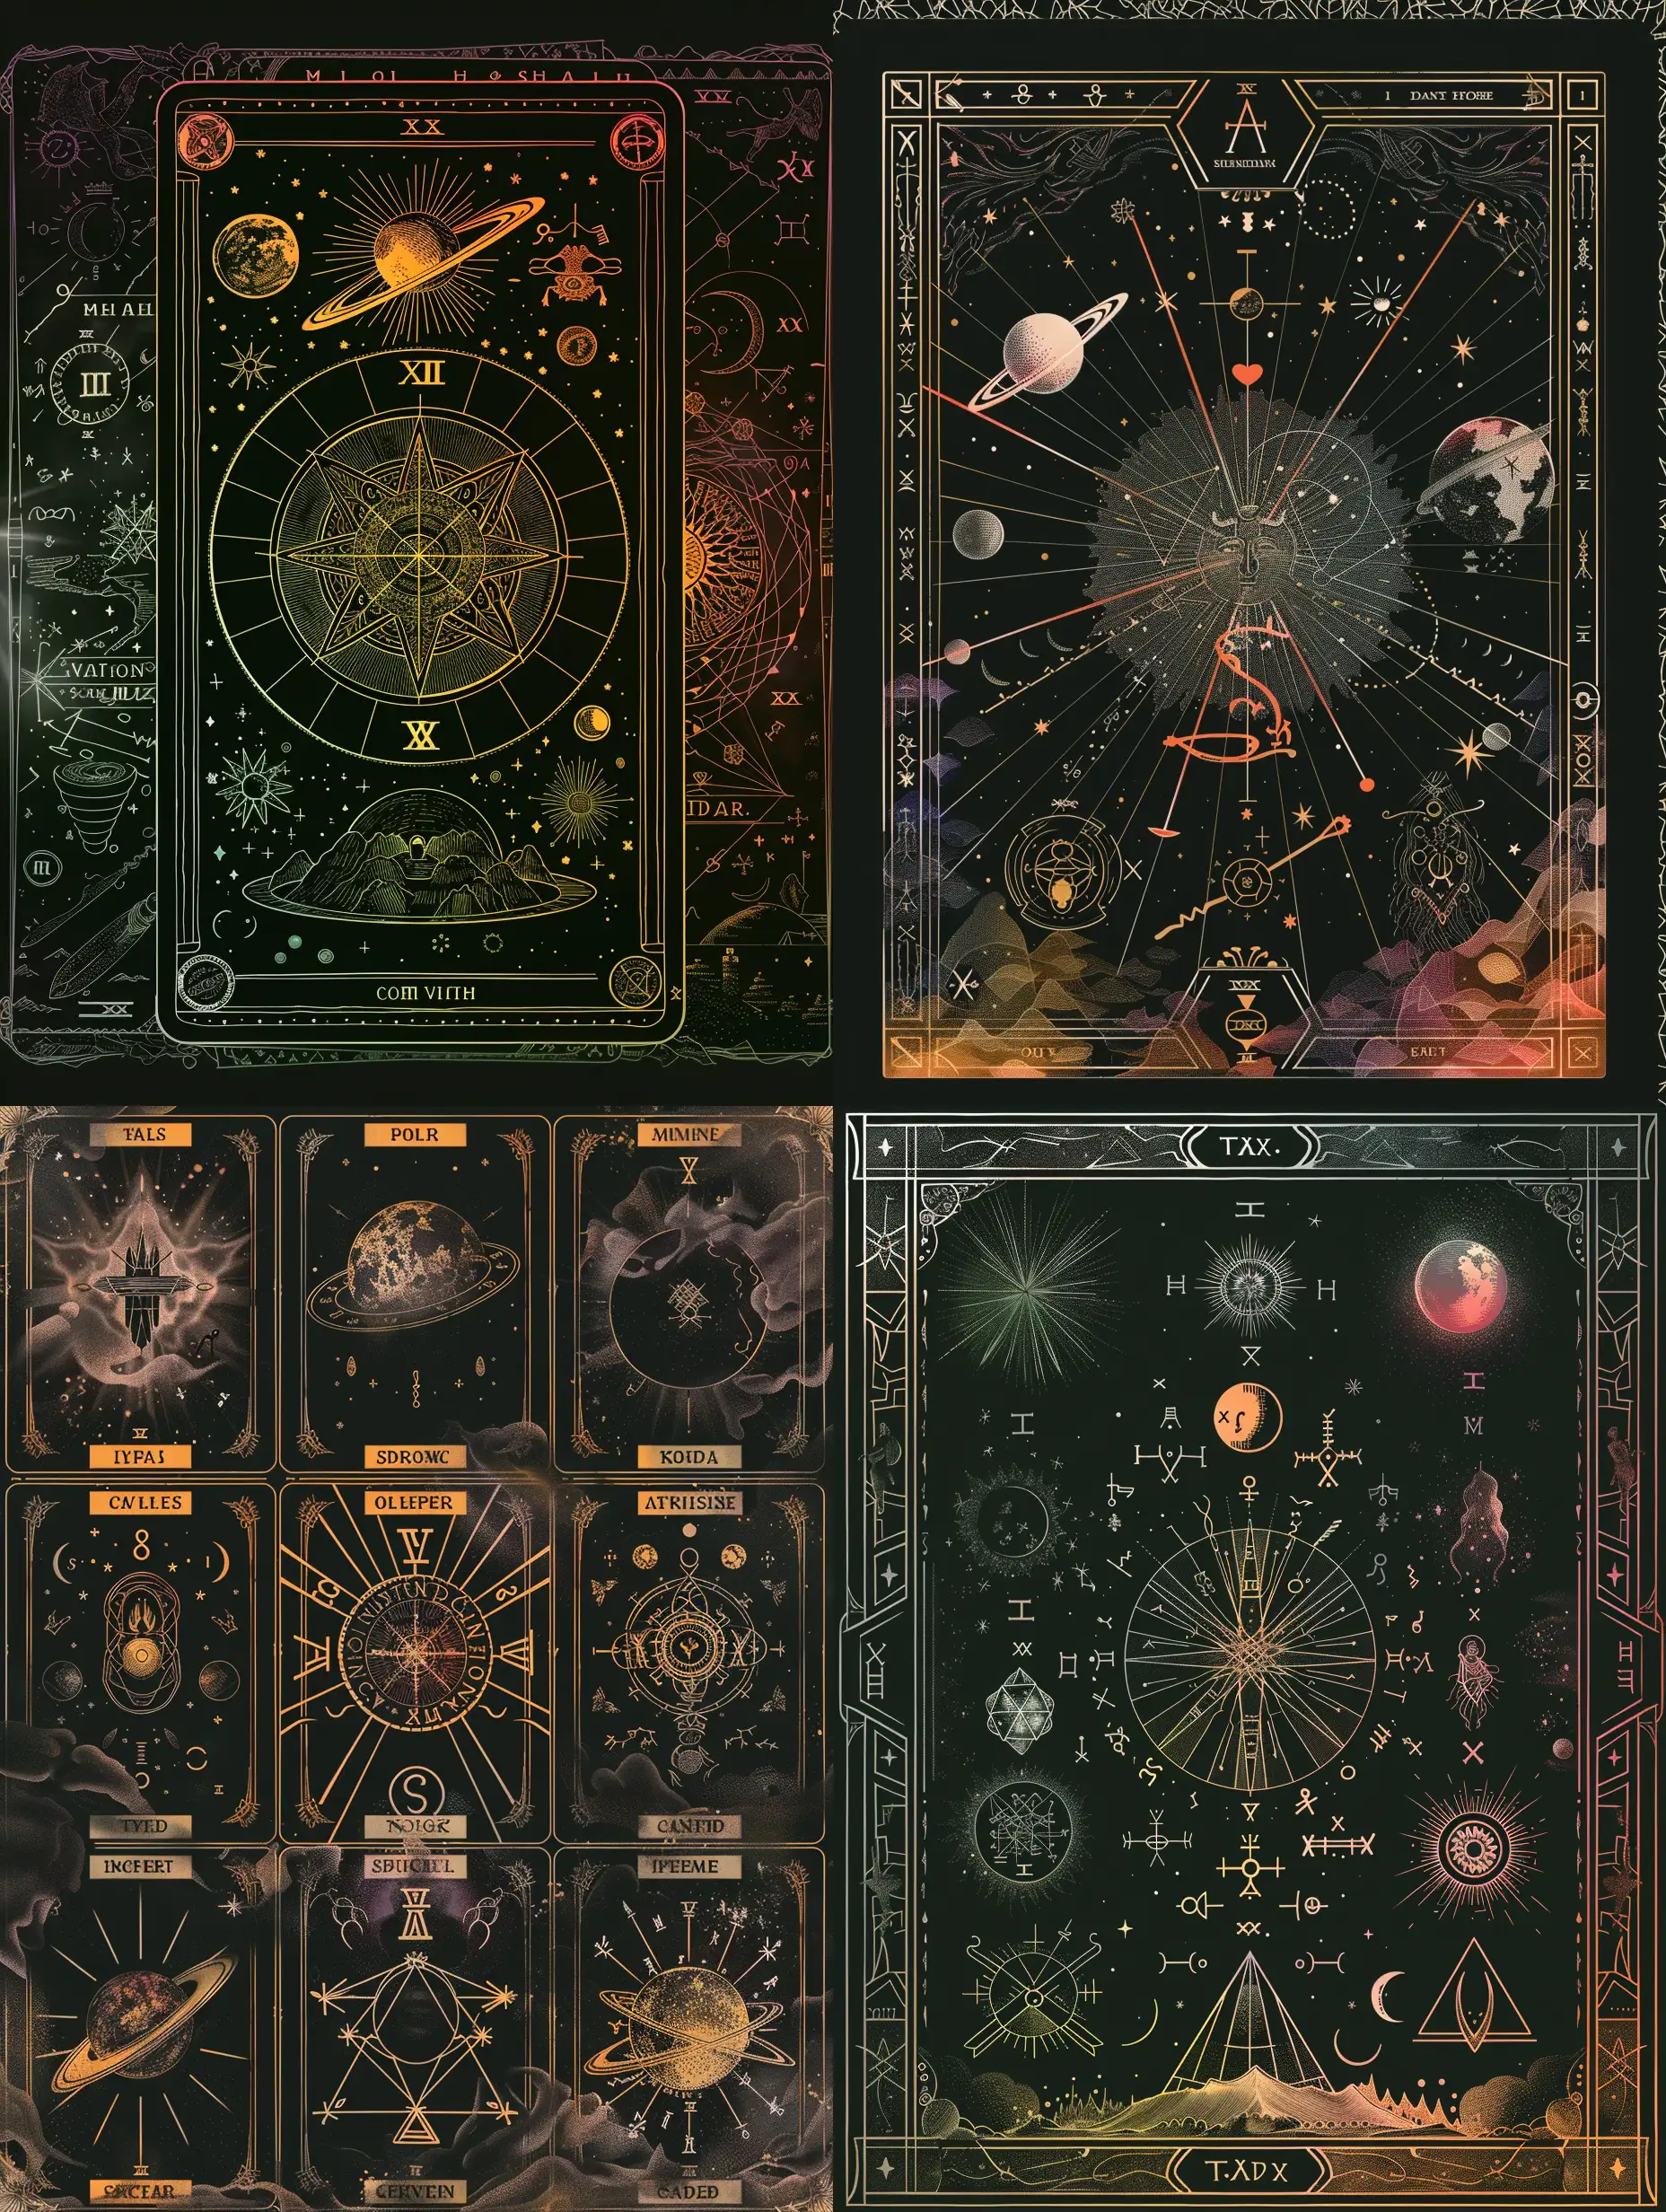 Mystical-Tarot-Card-Cover-with-Planets-Zodiac-Signs-Chakras-and-Elements